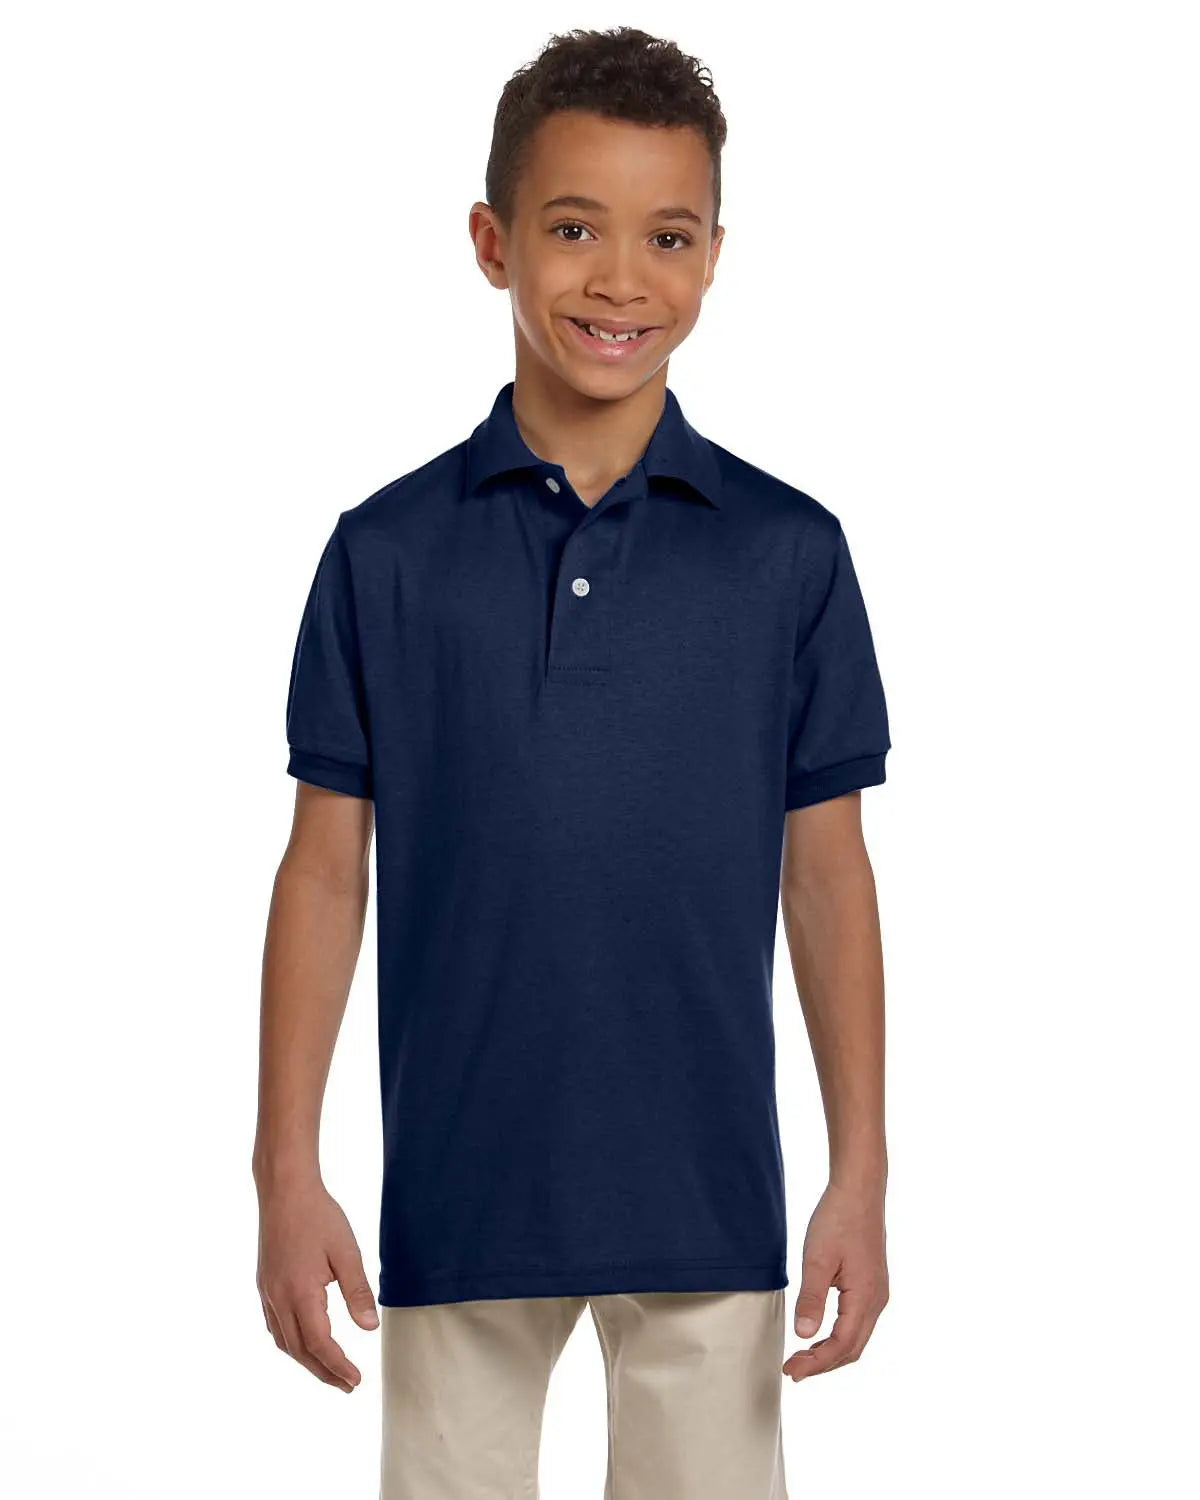 Jerzees Youth SpotShield™ Jersey Polo -Optional School Logos - An Initial Impression